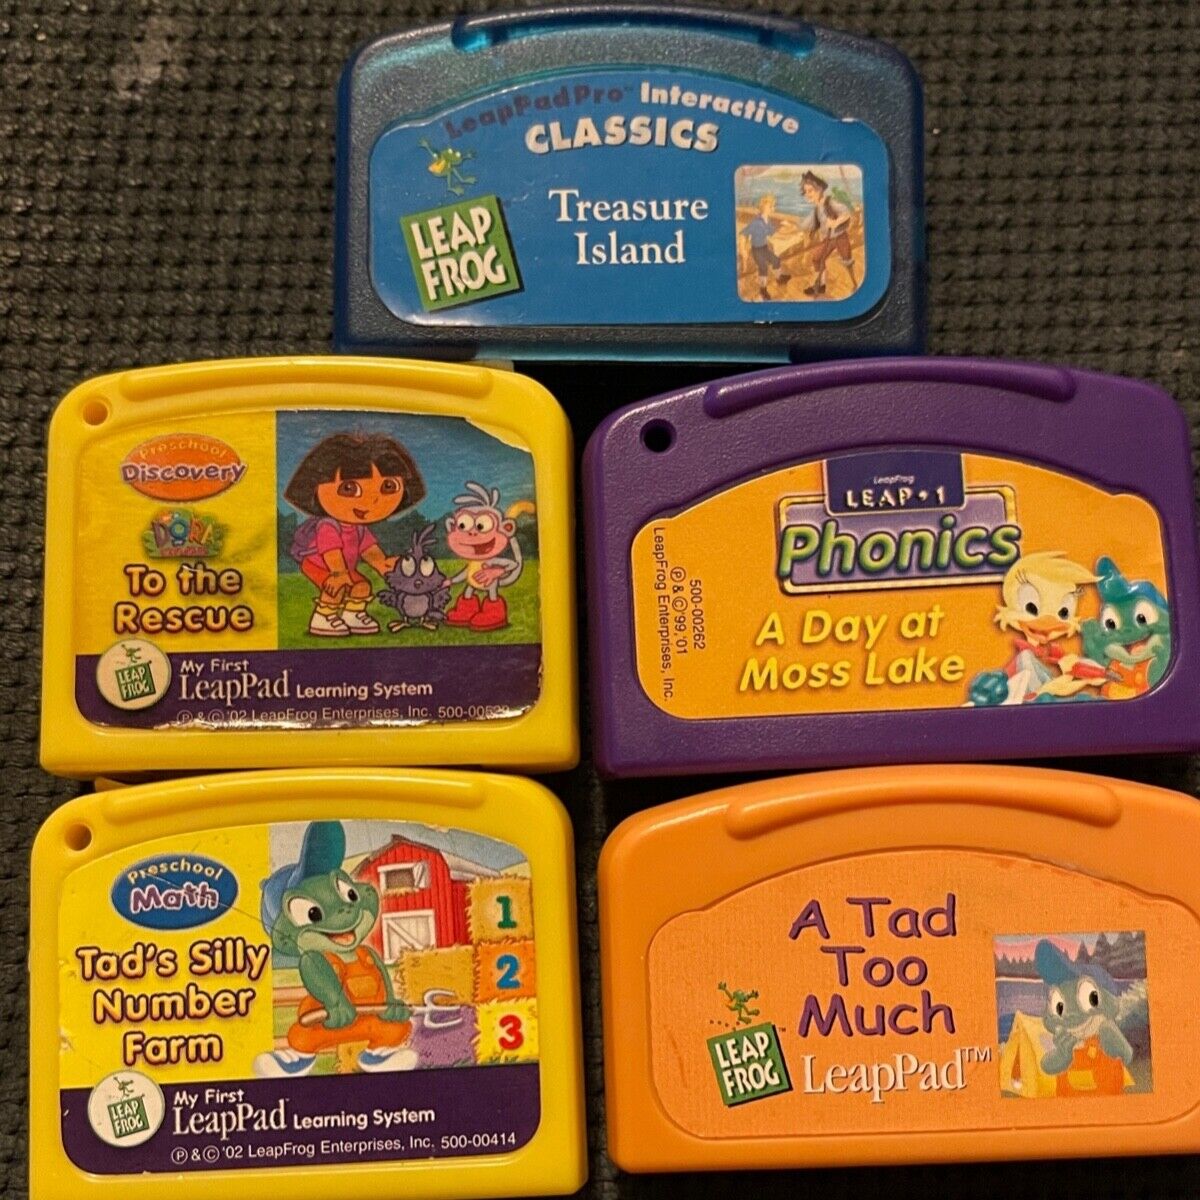 My First Leap Pad Dora The Explorer Dora to the rescue Game Cart